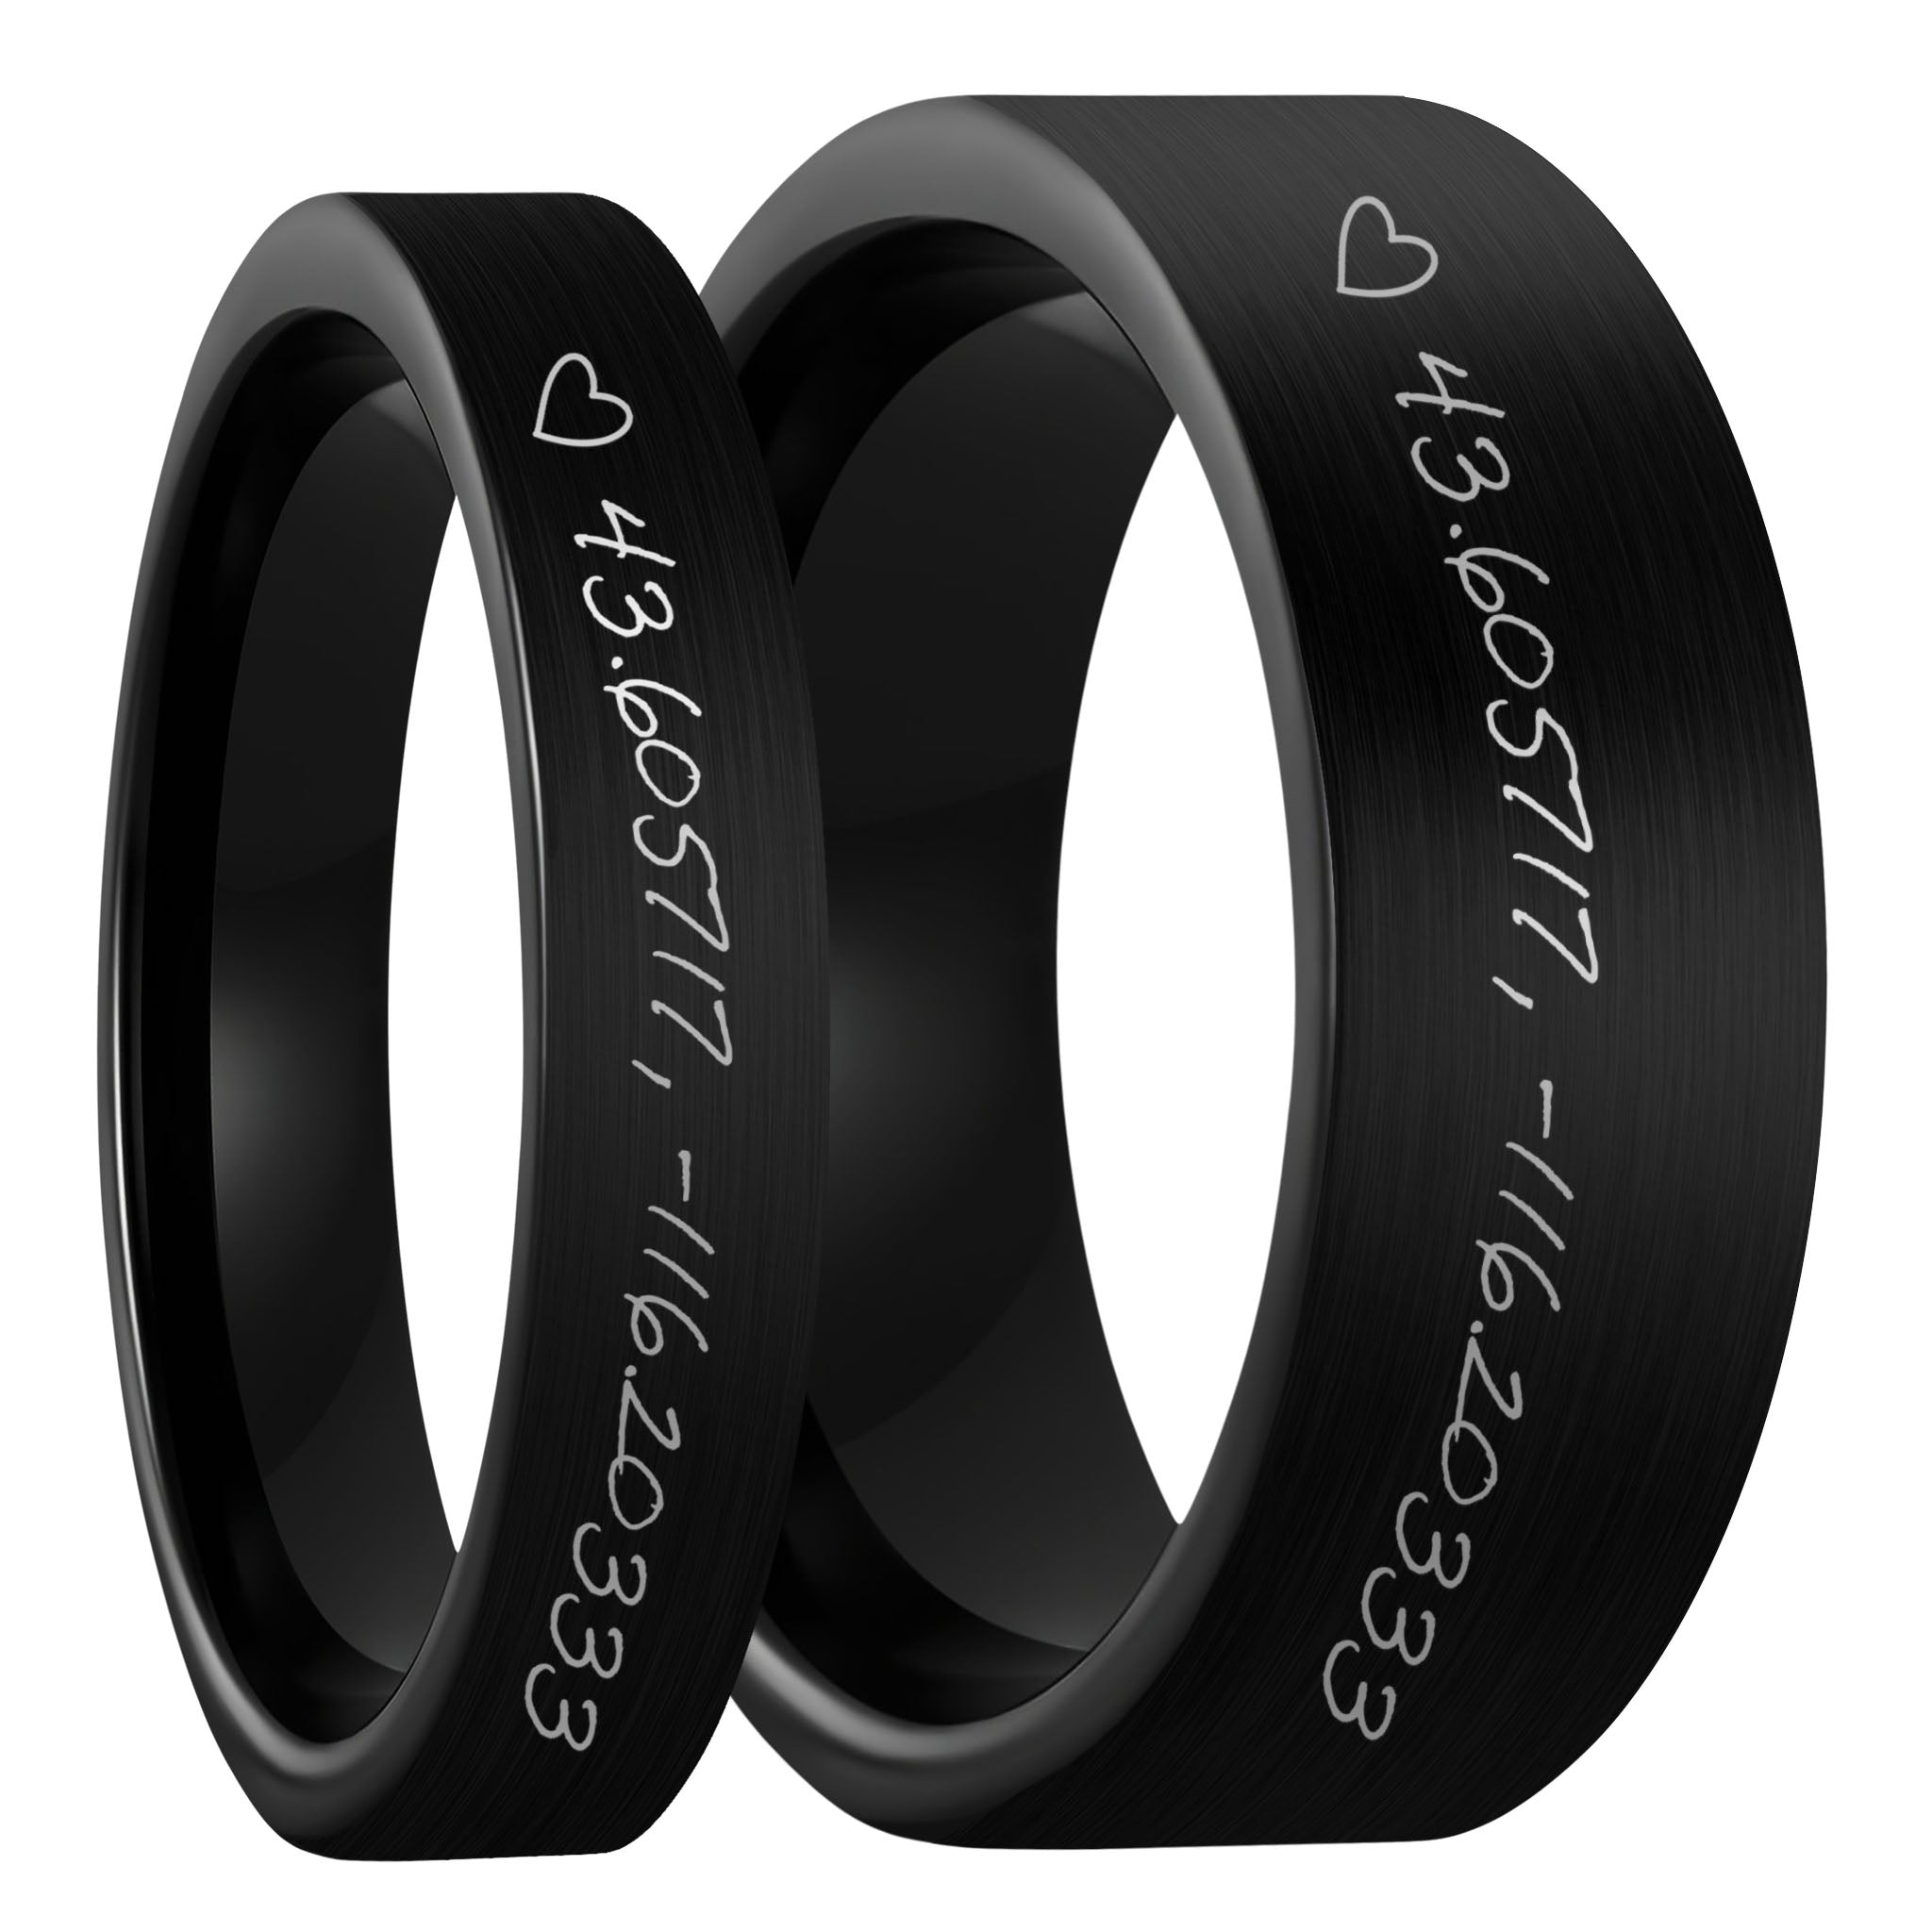 Buy Personalised Couple Rings, Black Stainless Steel Matching Rings,  Spinner Rings, Statement Rings, Valentine's Day Gift Online in India - Etsy